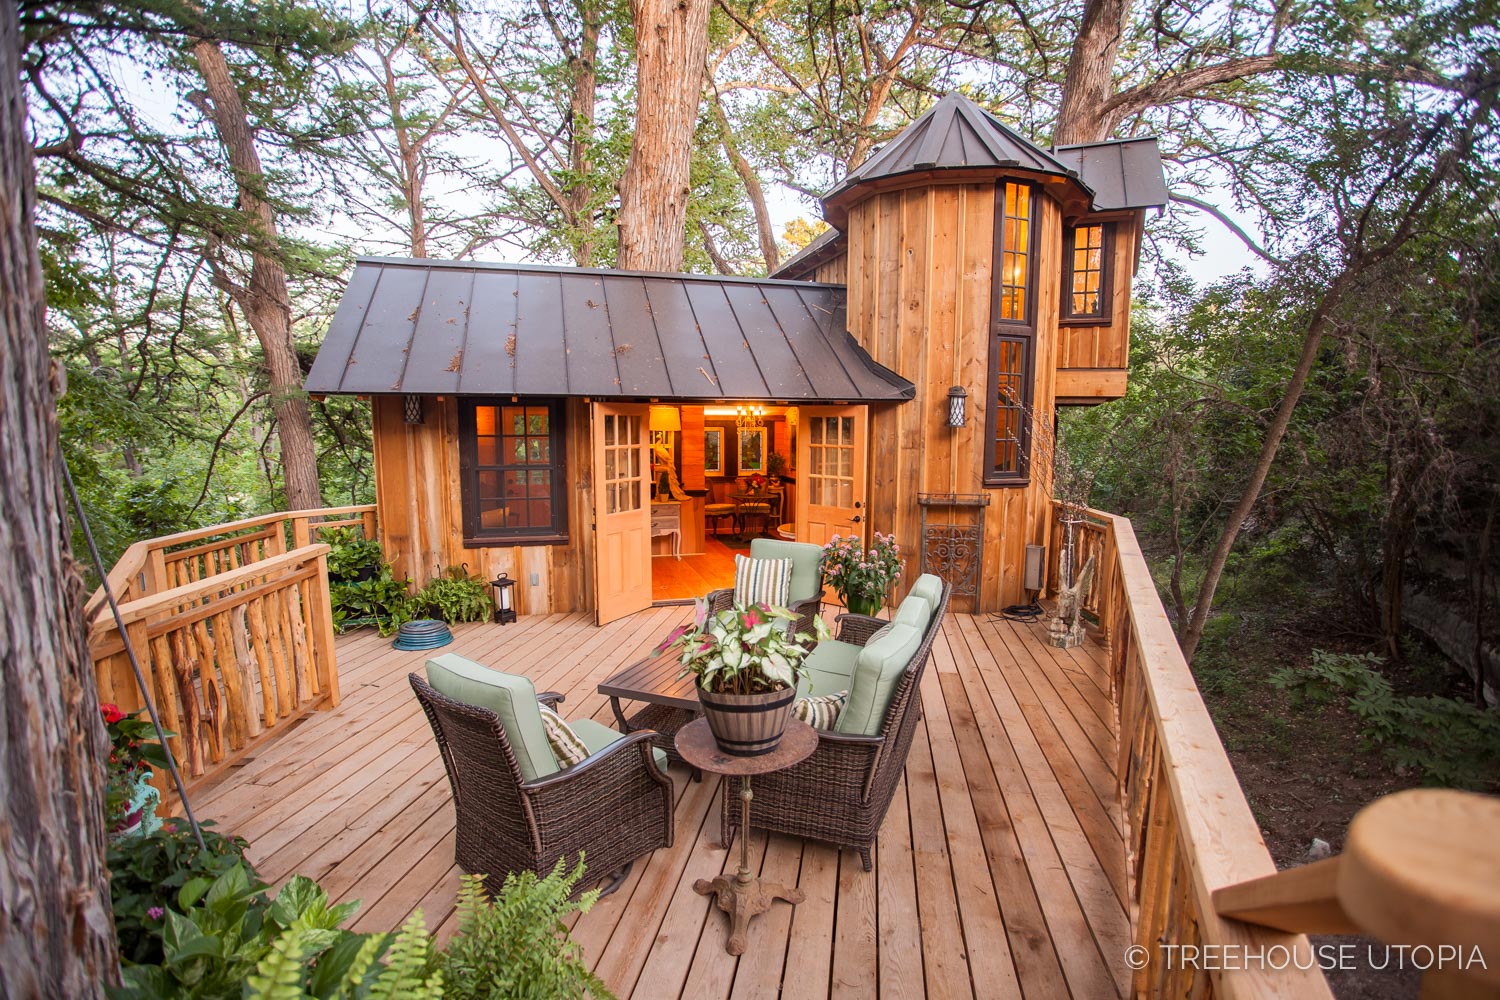 https://nelsontreehouse.com/wp-content/uploads/2020/03/Chateau_Treehouse_Utopia_deck.jpg